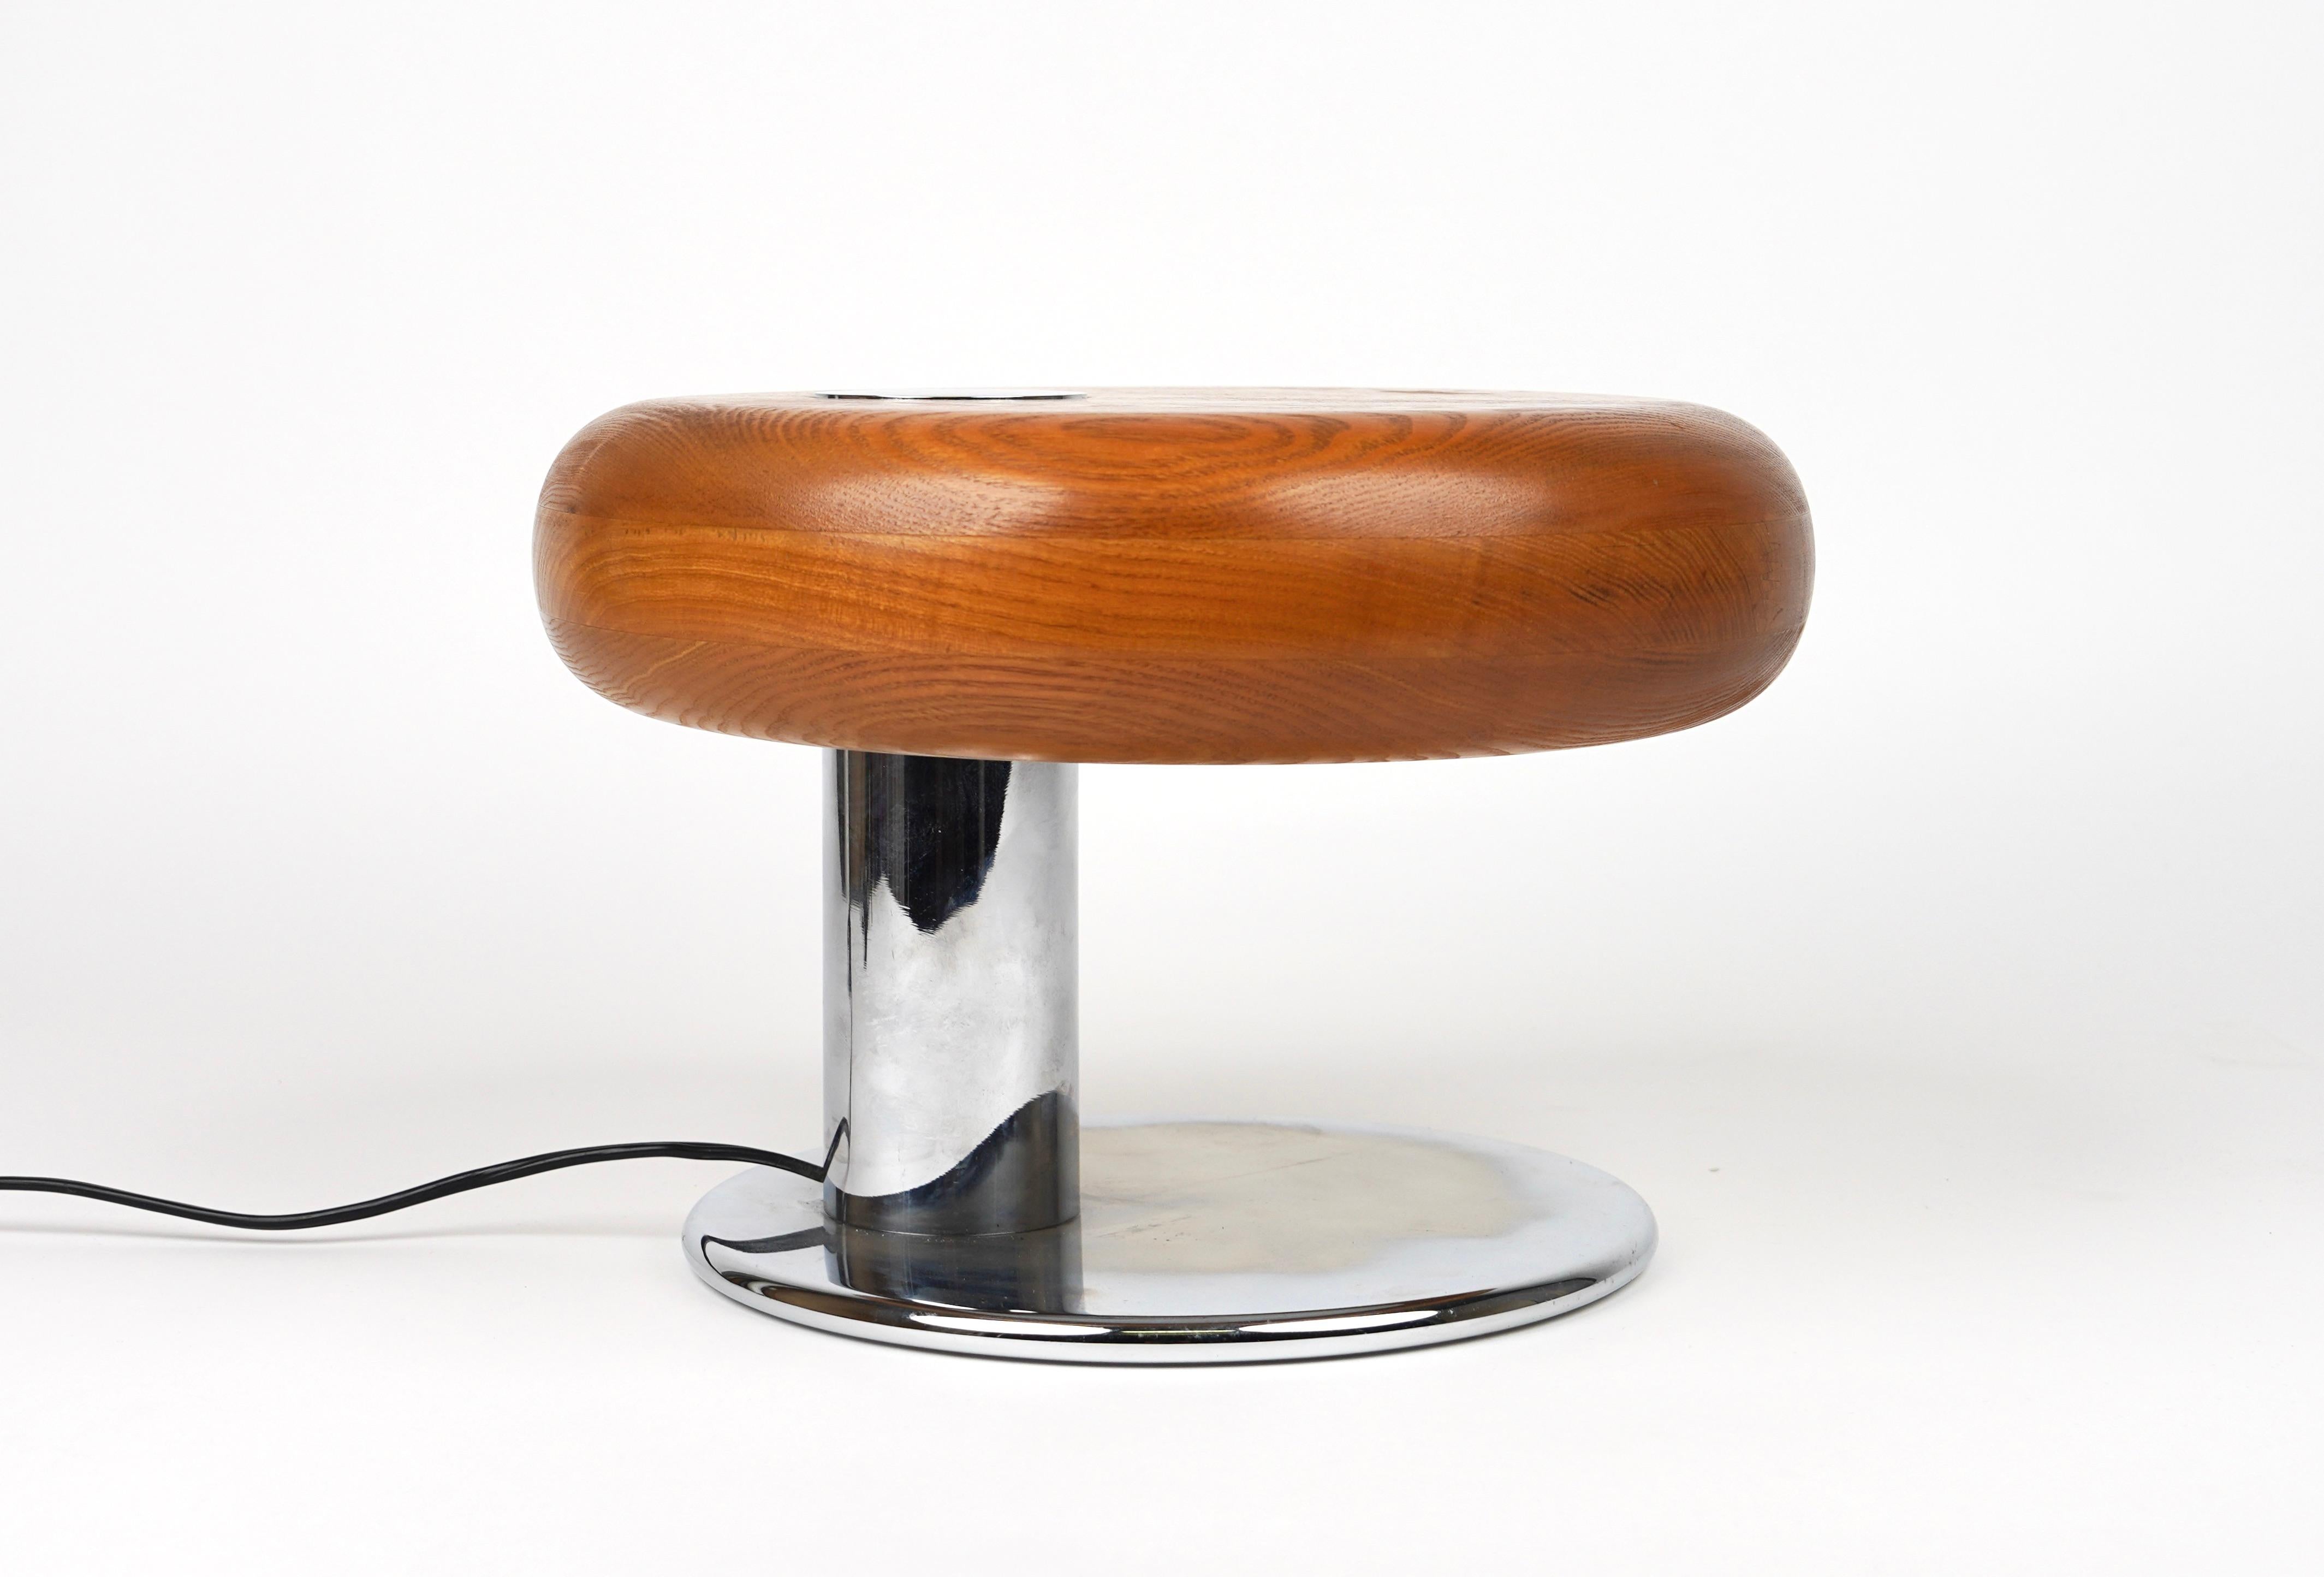 Italian Midcentury Table Lamp in Beechwood and Chrome, Italy, 1970s For Sale